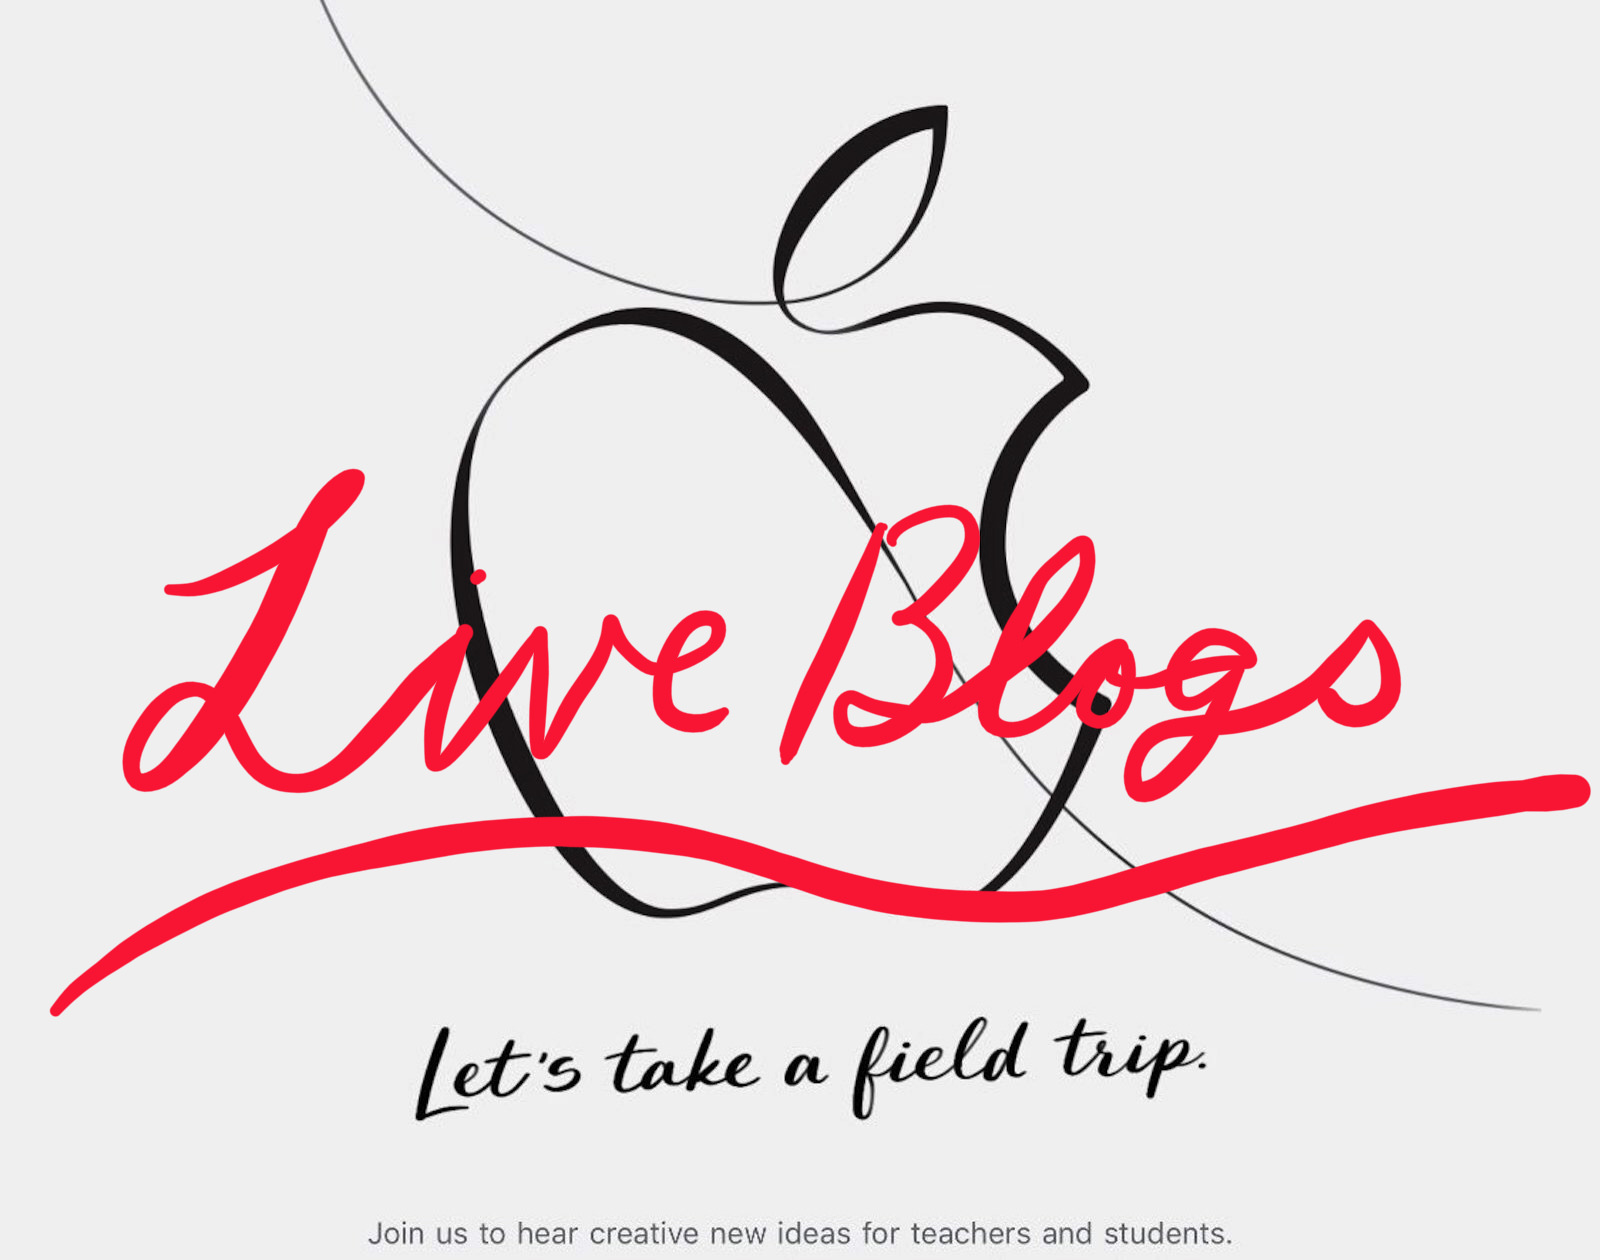 Apple-Special-March-Event-2018-Live-BLogs.jpg